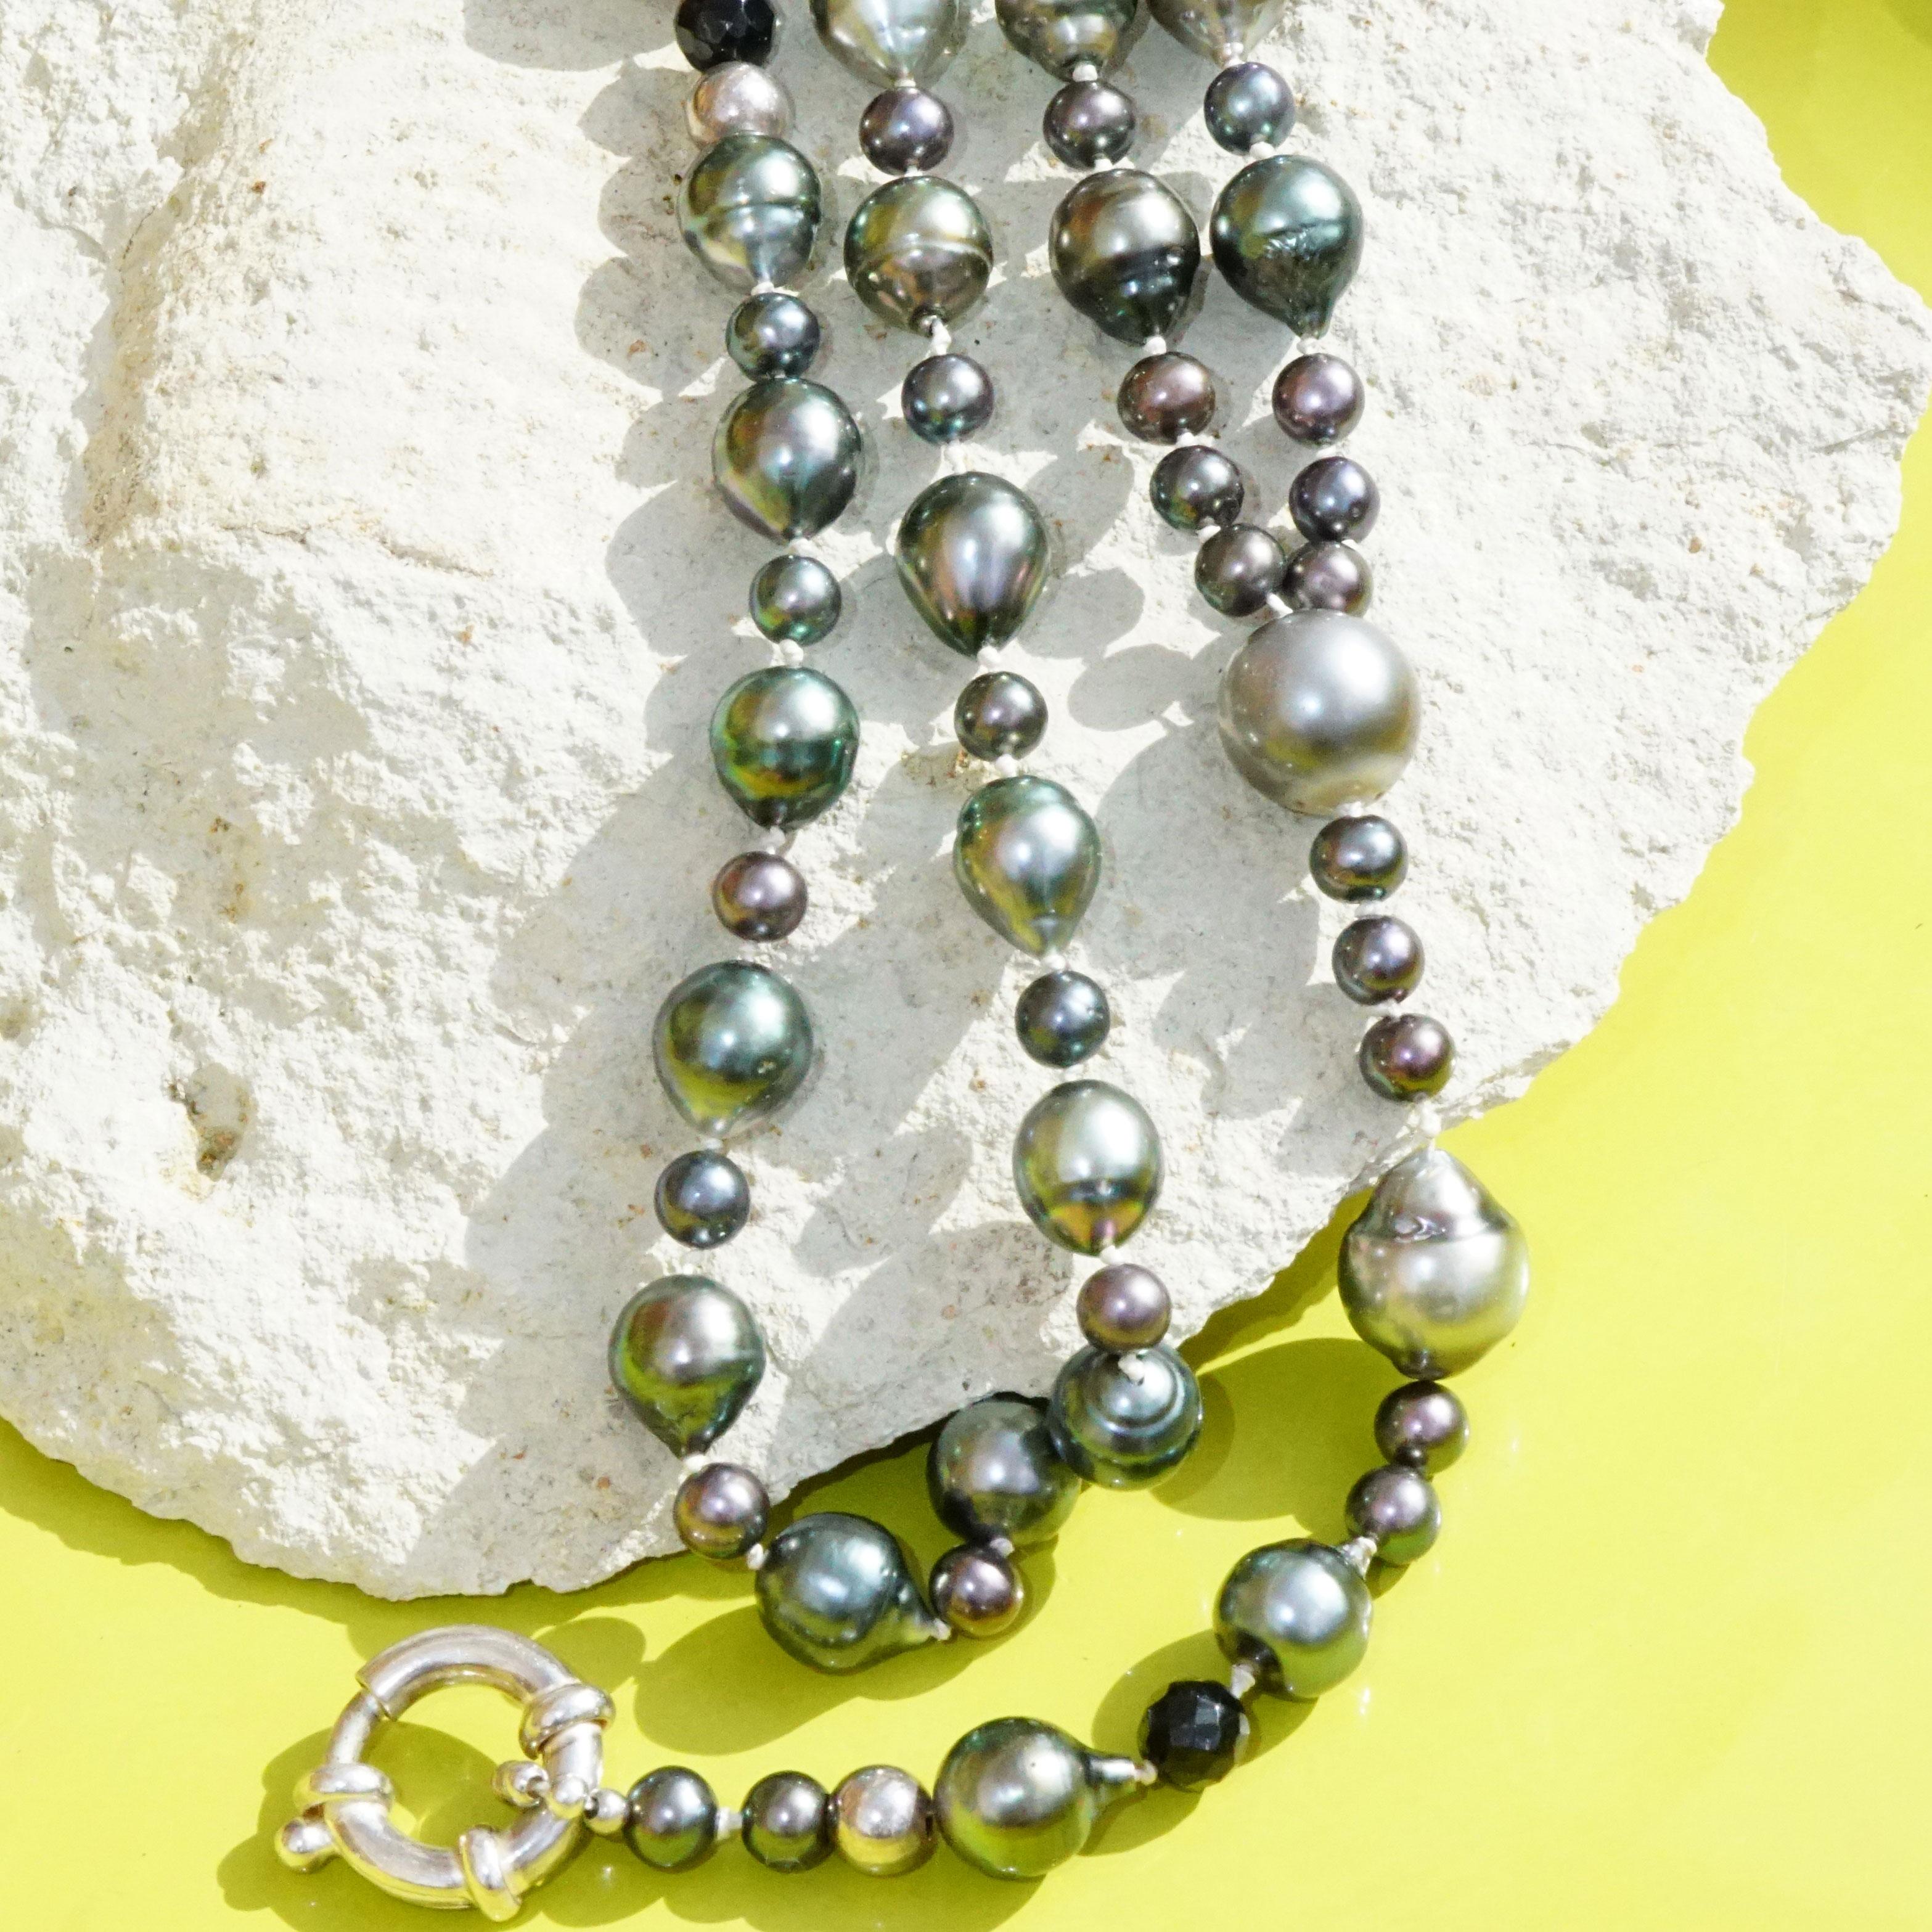 Tahiti Pearl Chain with Changeable Interchangeable Pendant Rosary 2